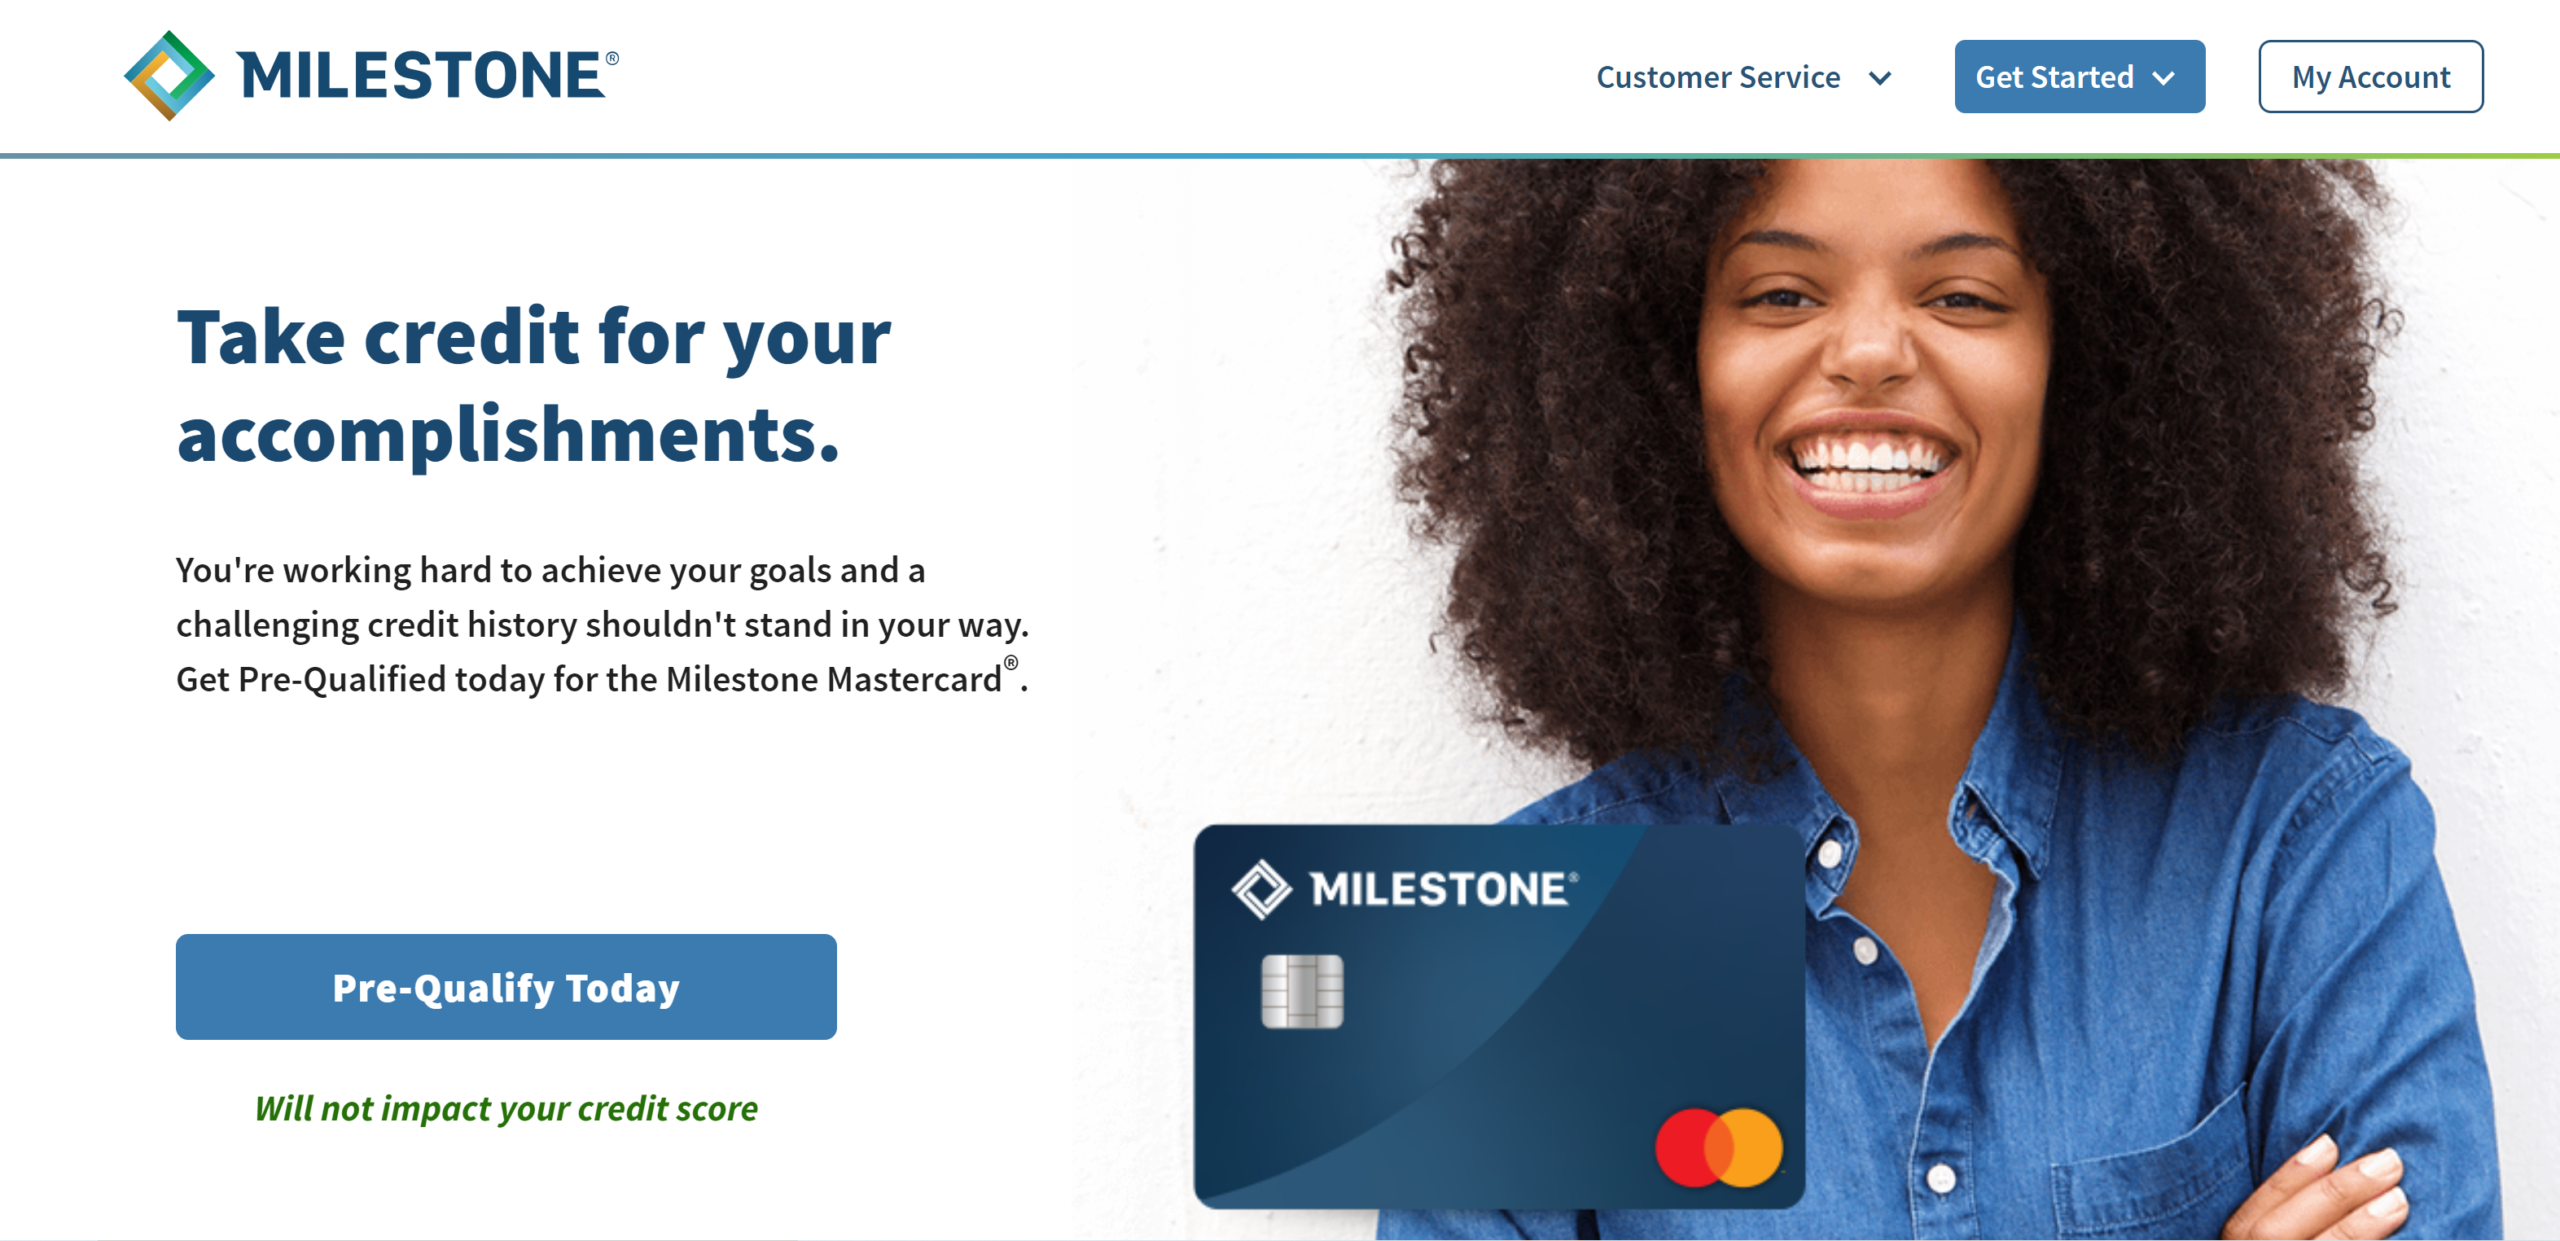 Milestone Gold MasterCard - access to your credit card account online